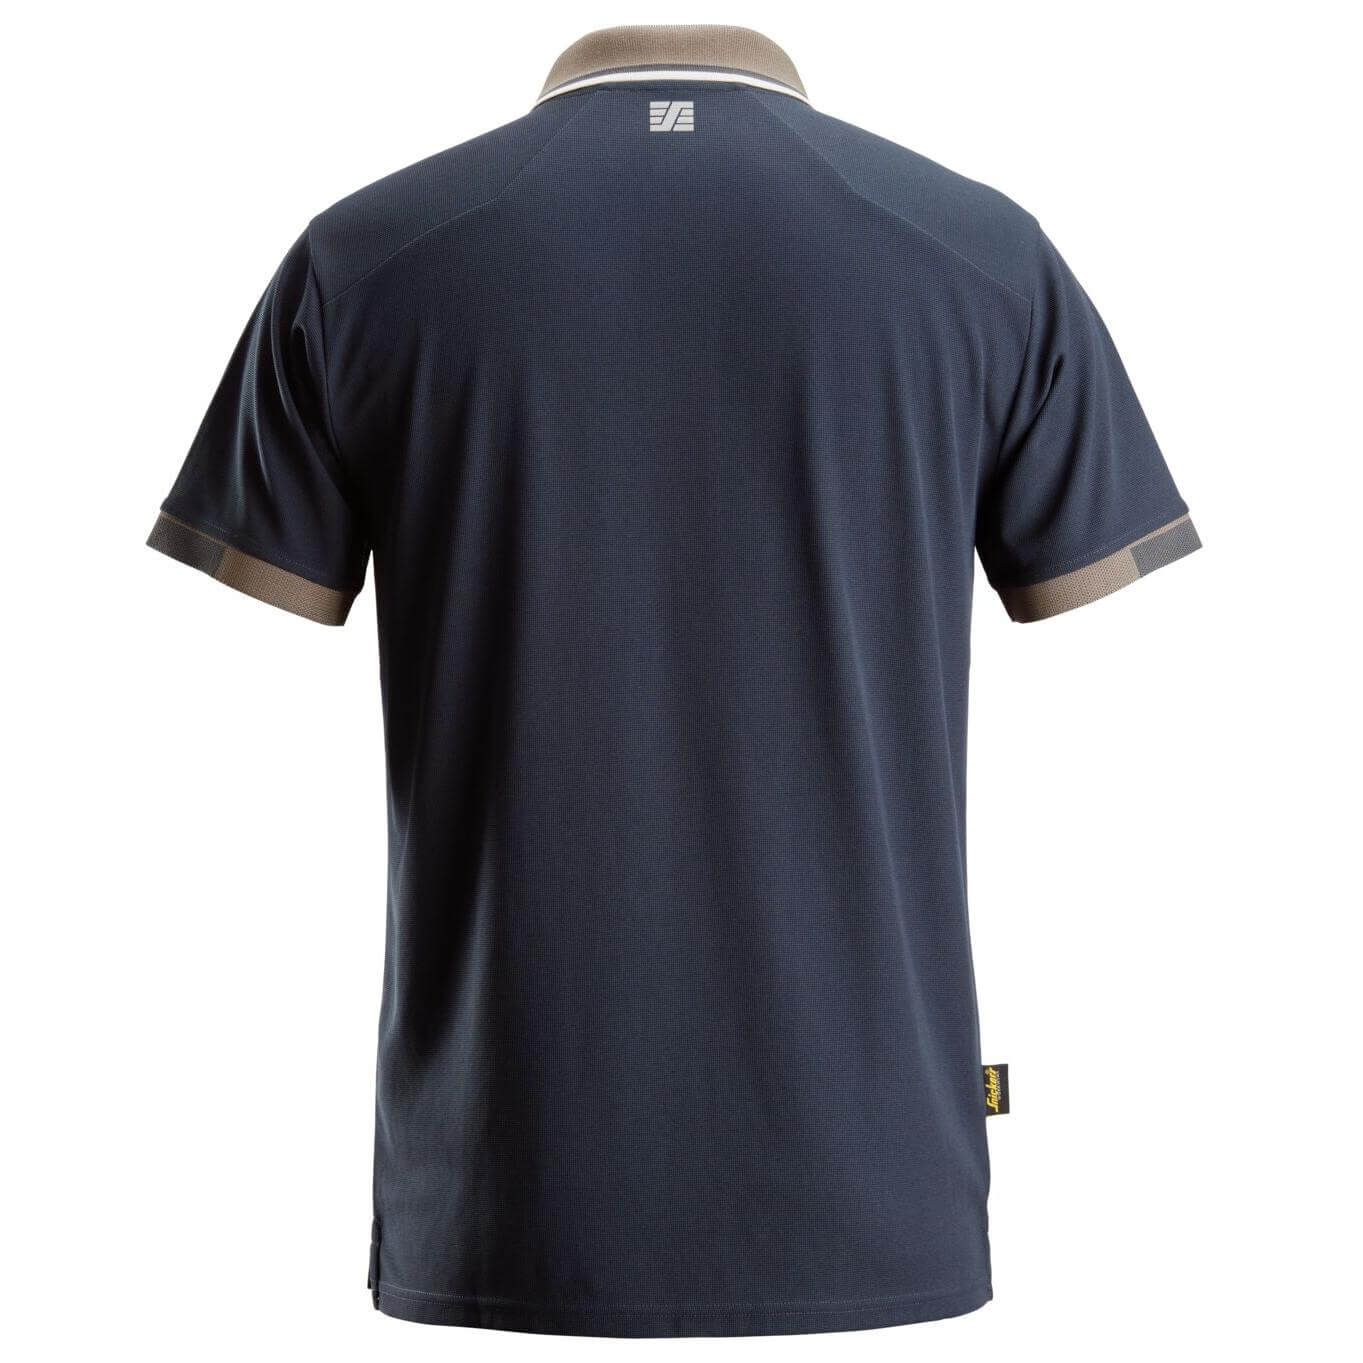 Snickers 2724 AllroundWork 37.5 Short Sleeve Moisture Wicking Polo Shirt Navy back3626871 #colour_navy